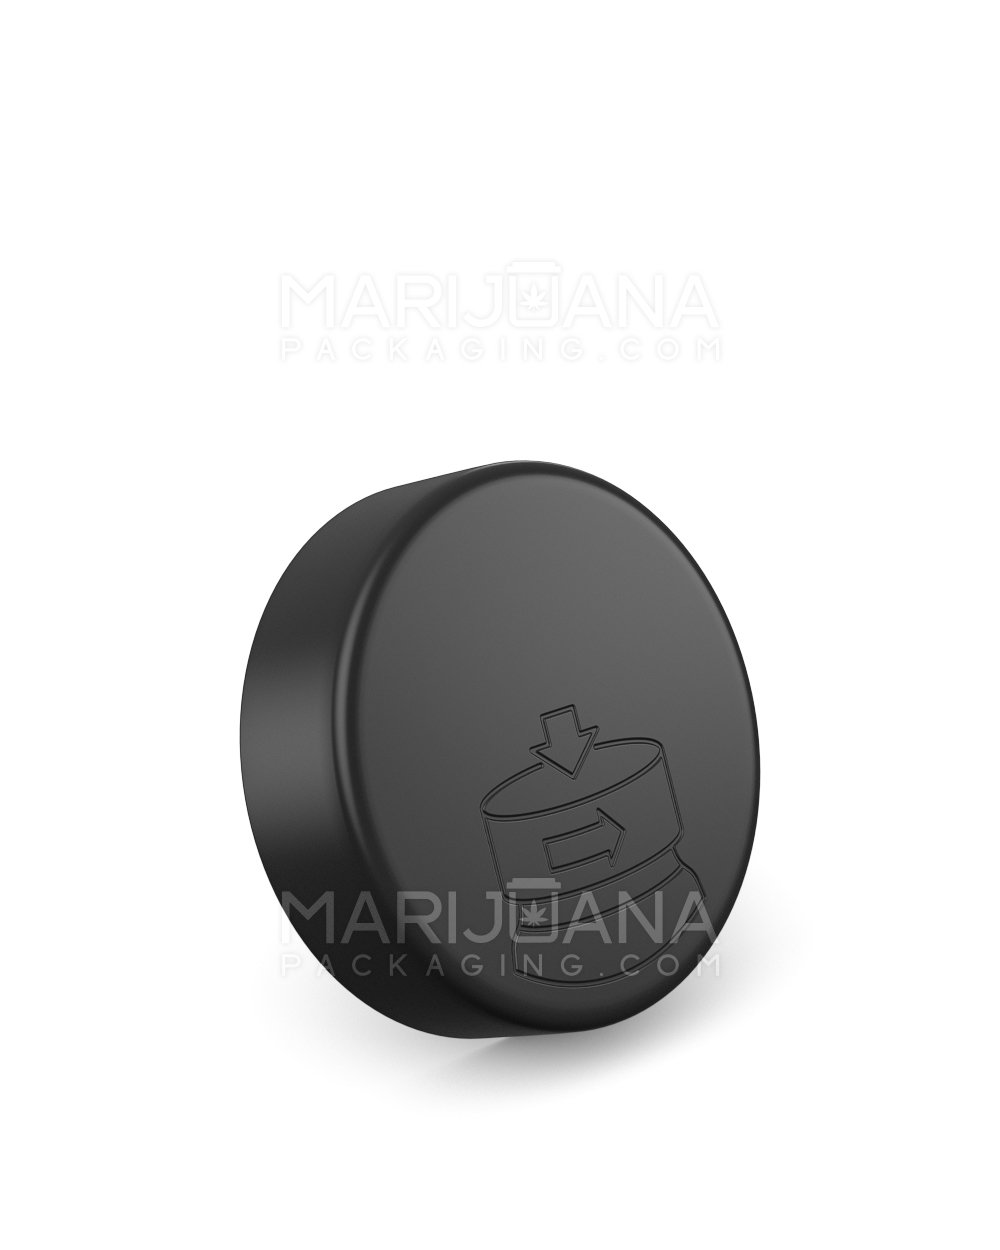 Child Resistant & Sustainable | Recyclable Push & Turn Reclaimed Ocean Plastic Caps w/ Foam Liner | 53mm - Matte Black  - 1